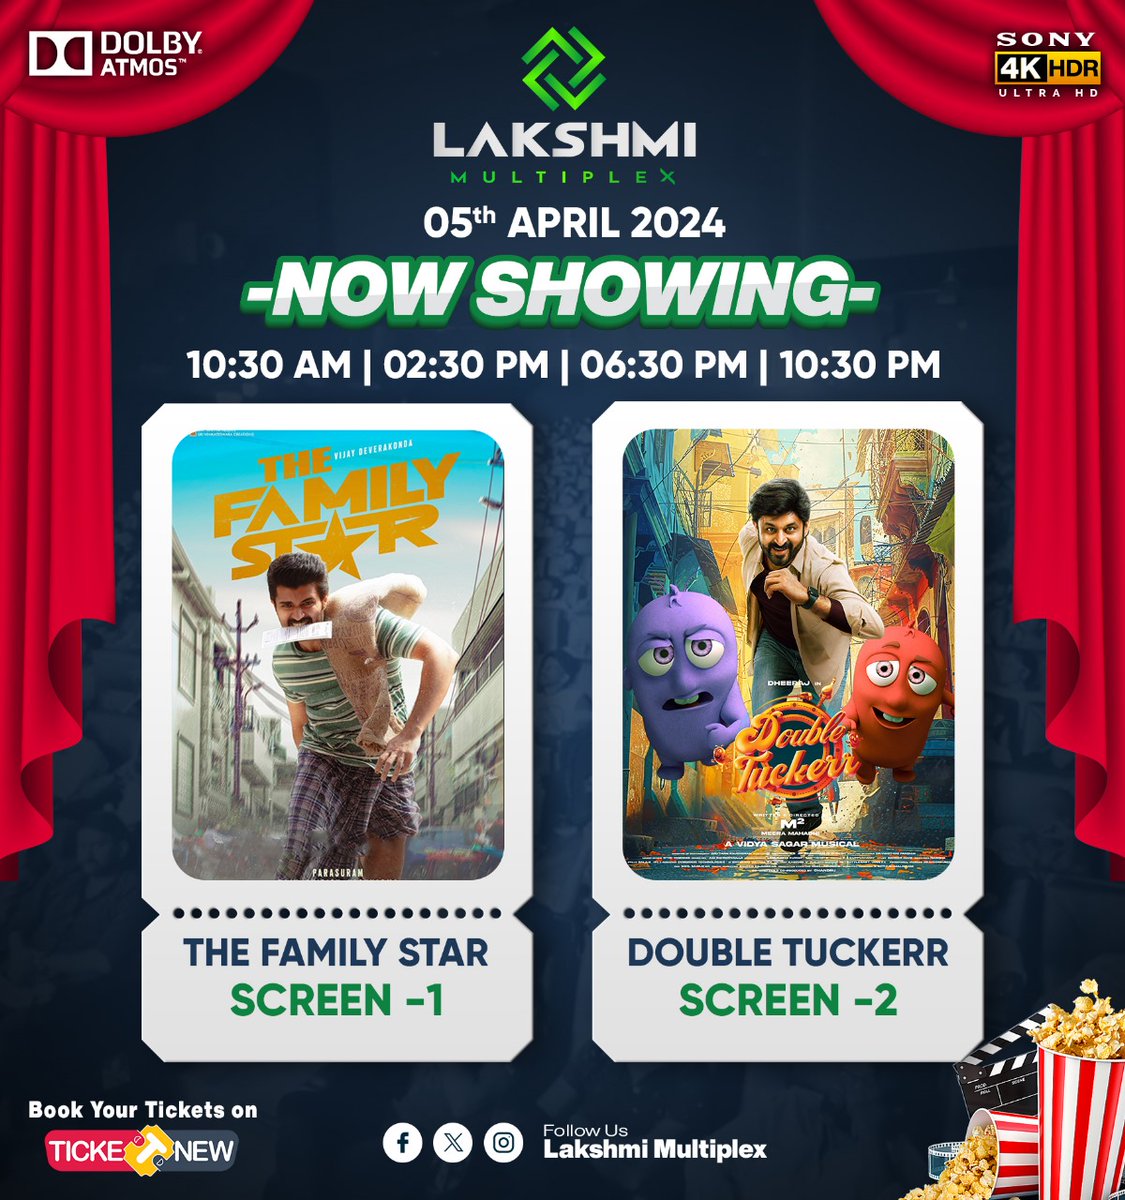 Now showing @lakshmimultiplex Screen - 1 The Family Star 💥 Screen - 2 Double Tuckerr 💯❤️ Experience kovilpattis biggest screen 🤩 Book your tickets on @ticketnew #lakshmimultiplex